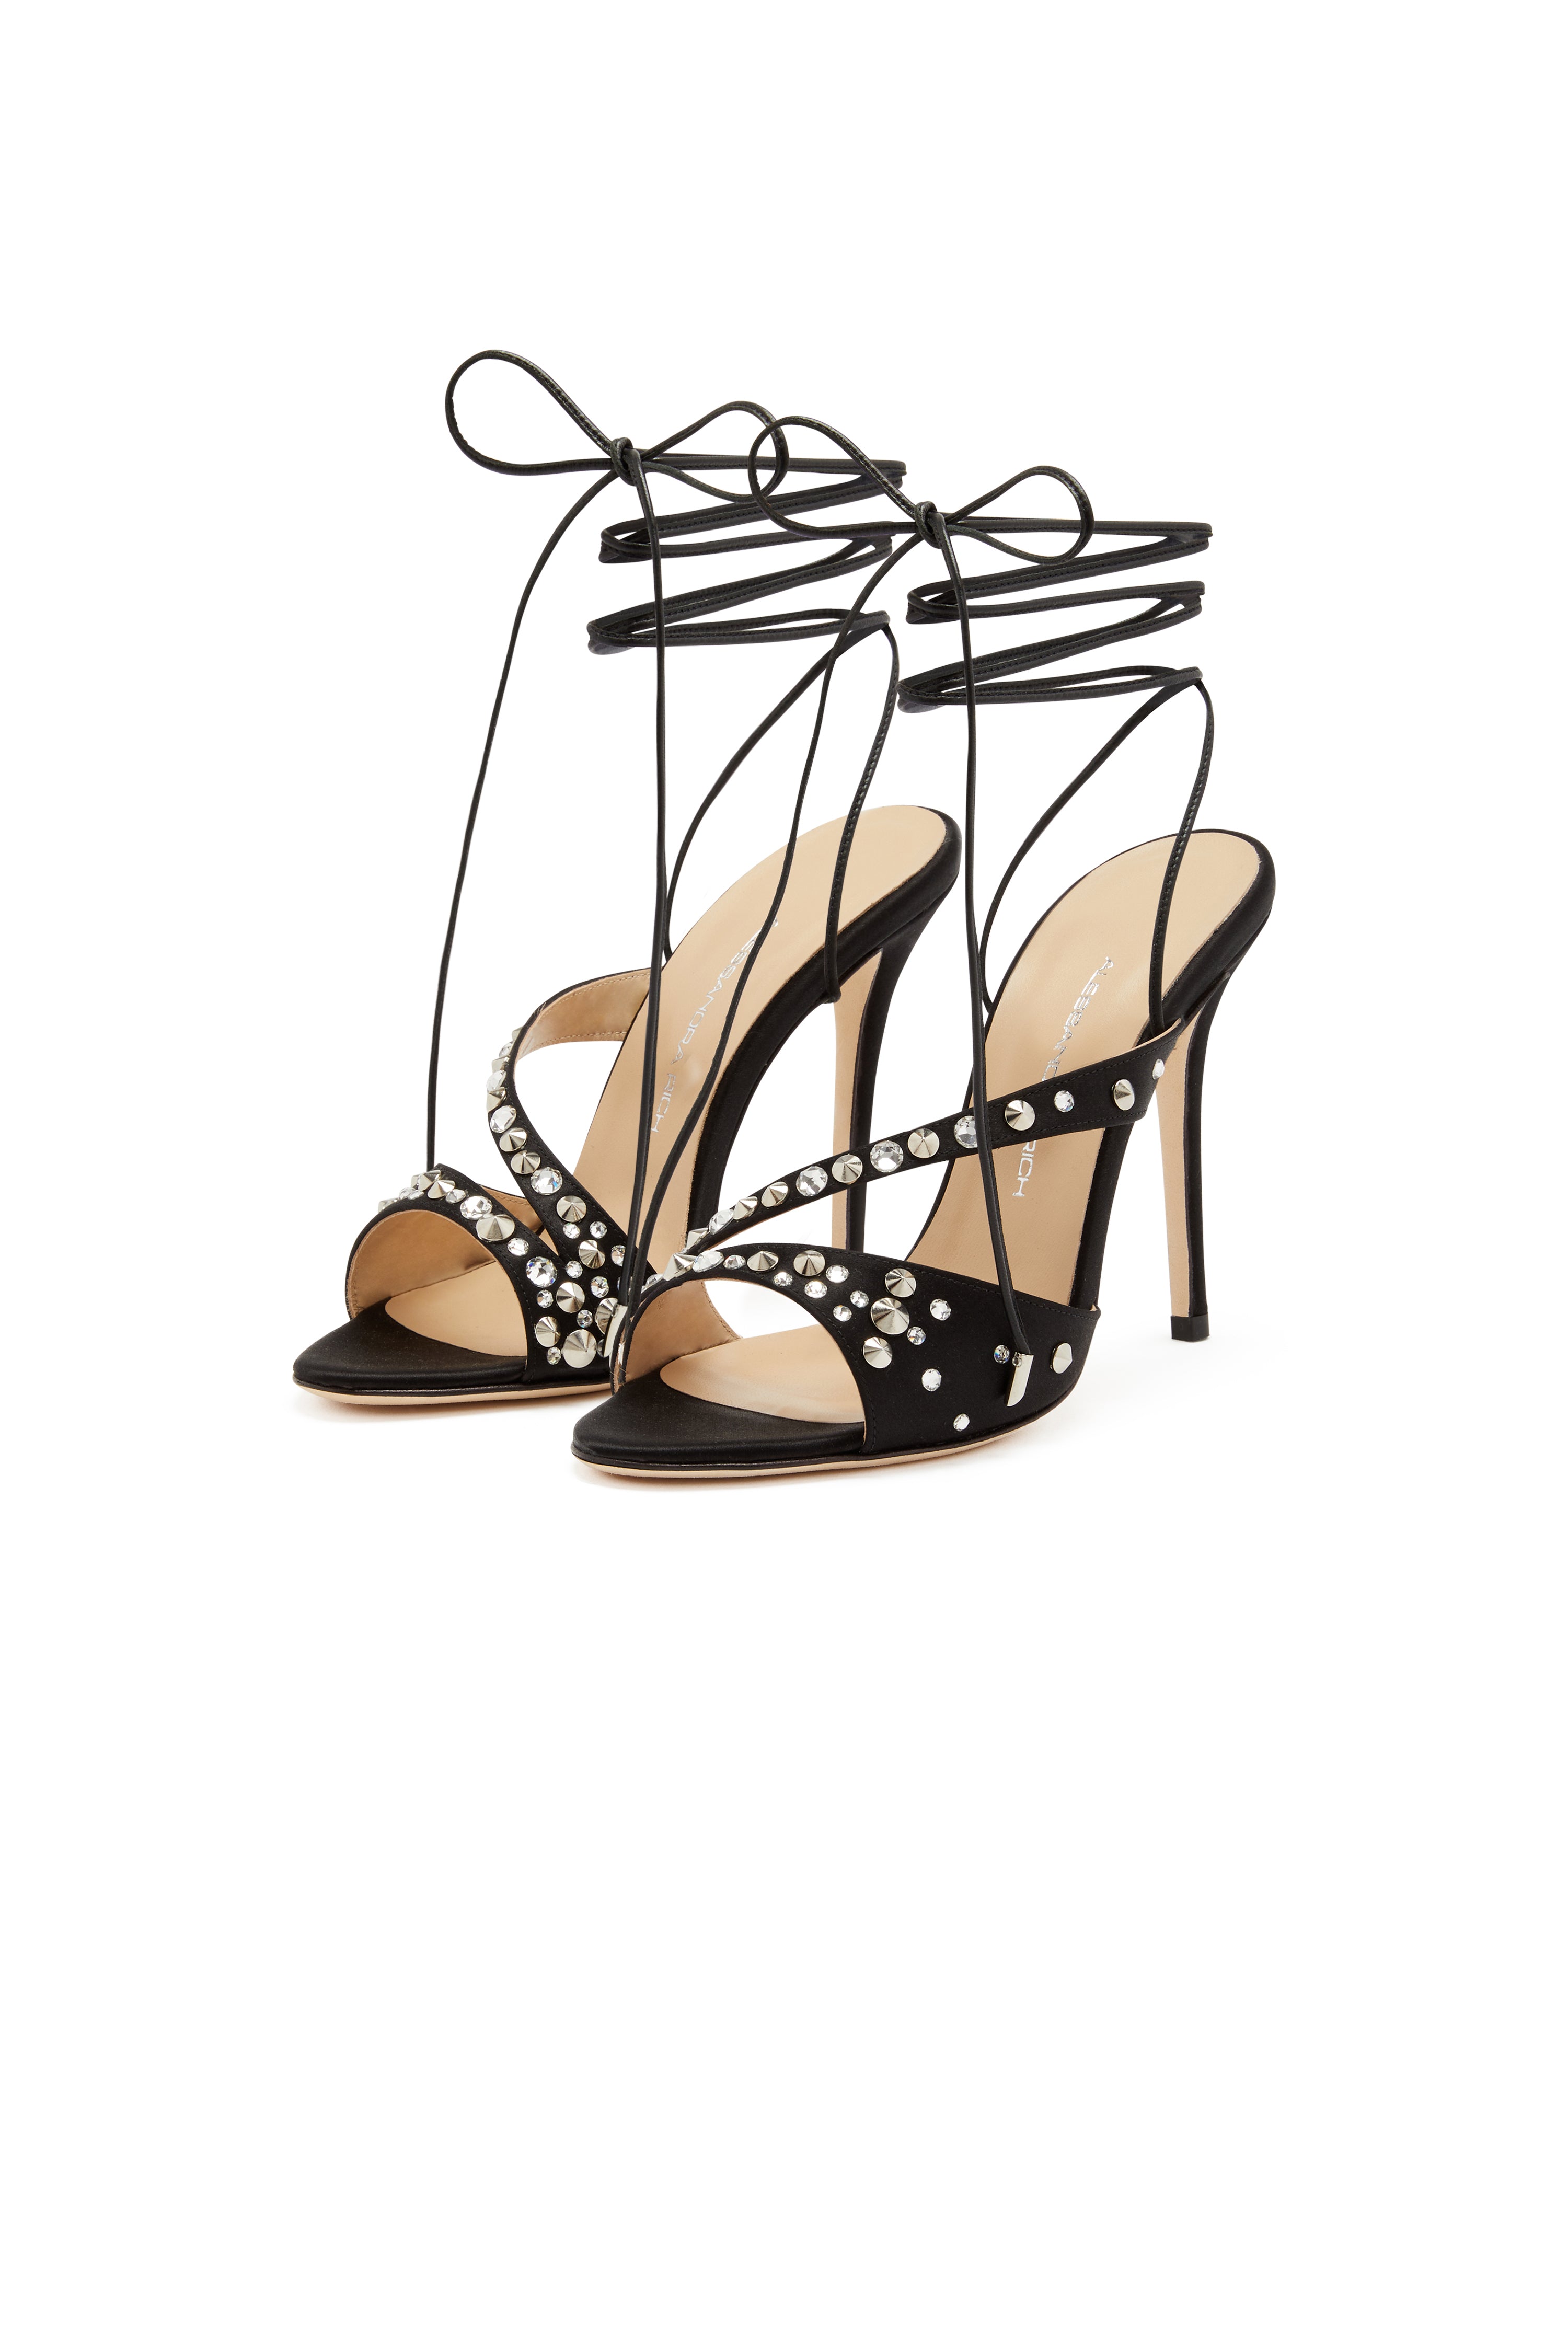 SILK SATIN SANDALS WITH LACES AND CRYSTALS - 10CM